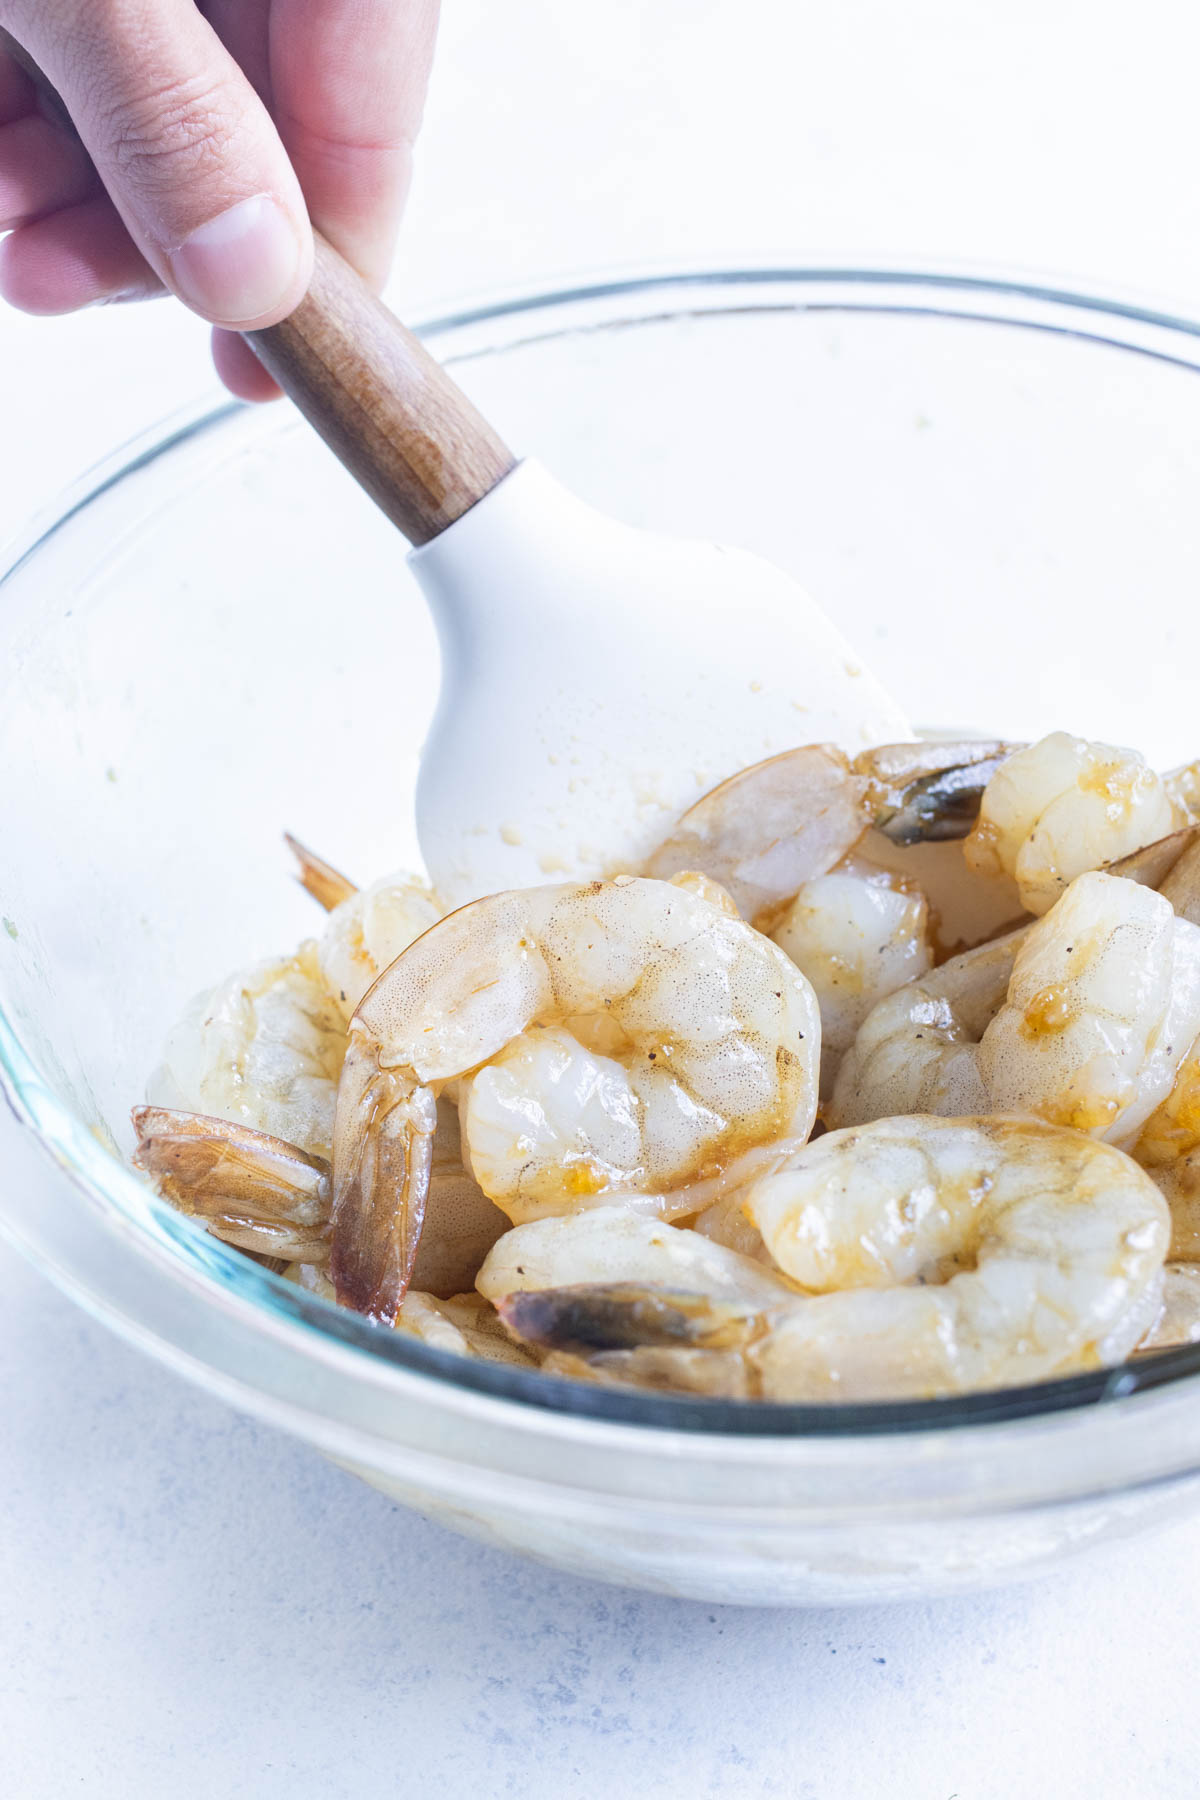 Shrimp is tossed with a marinade.